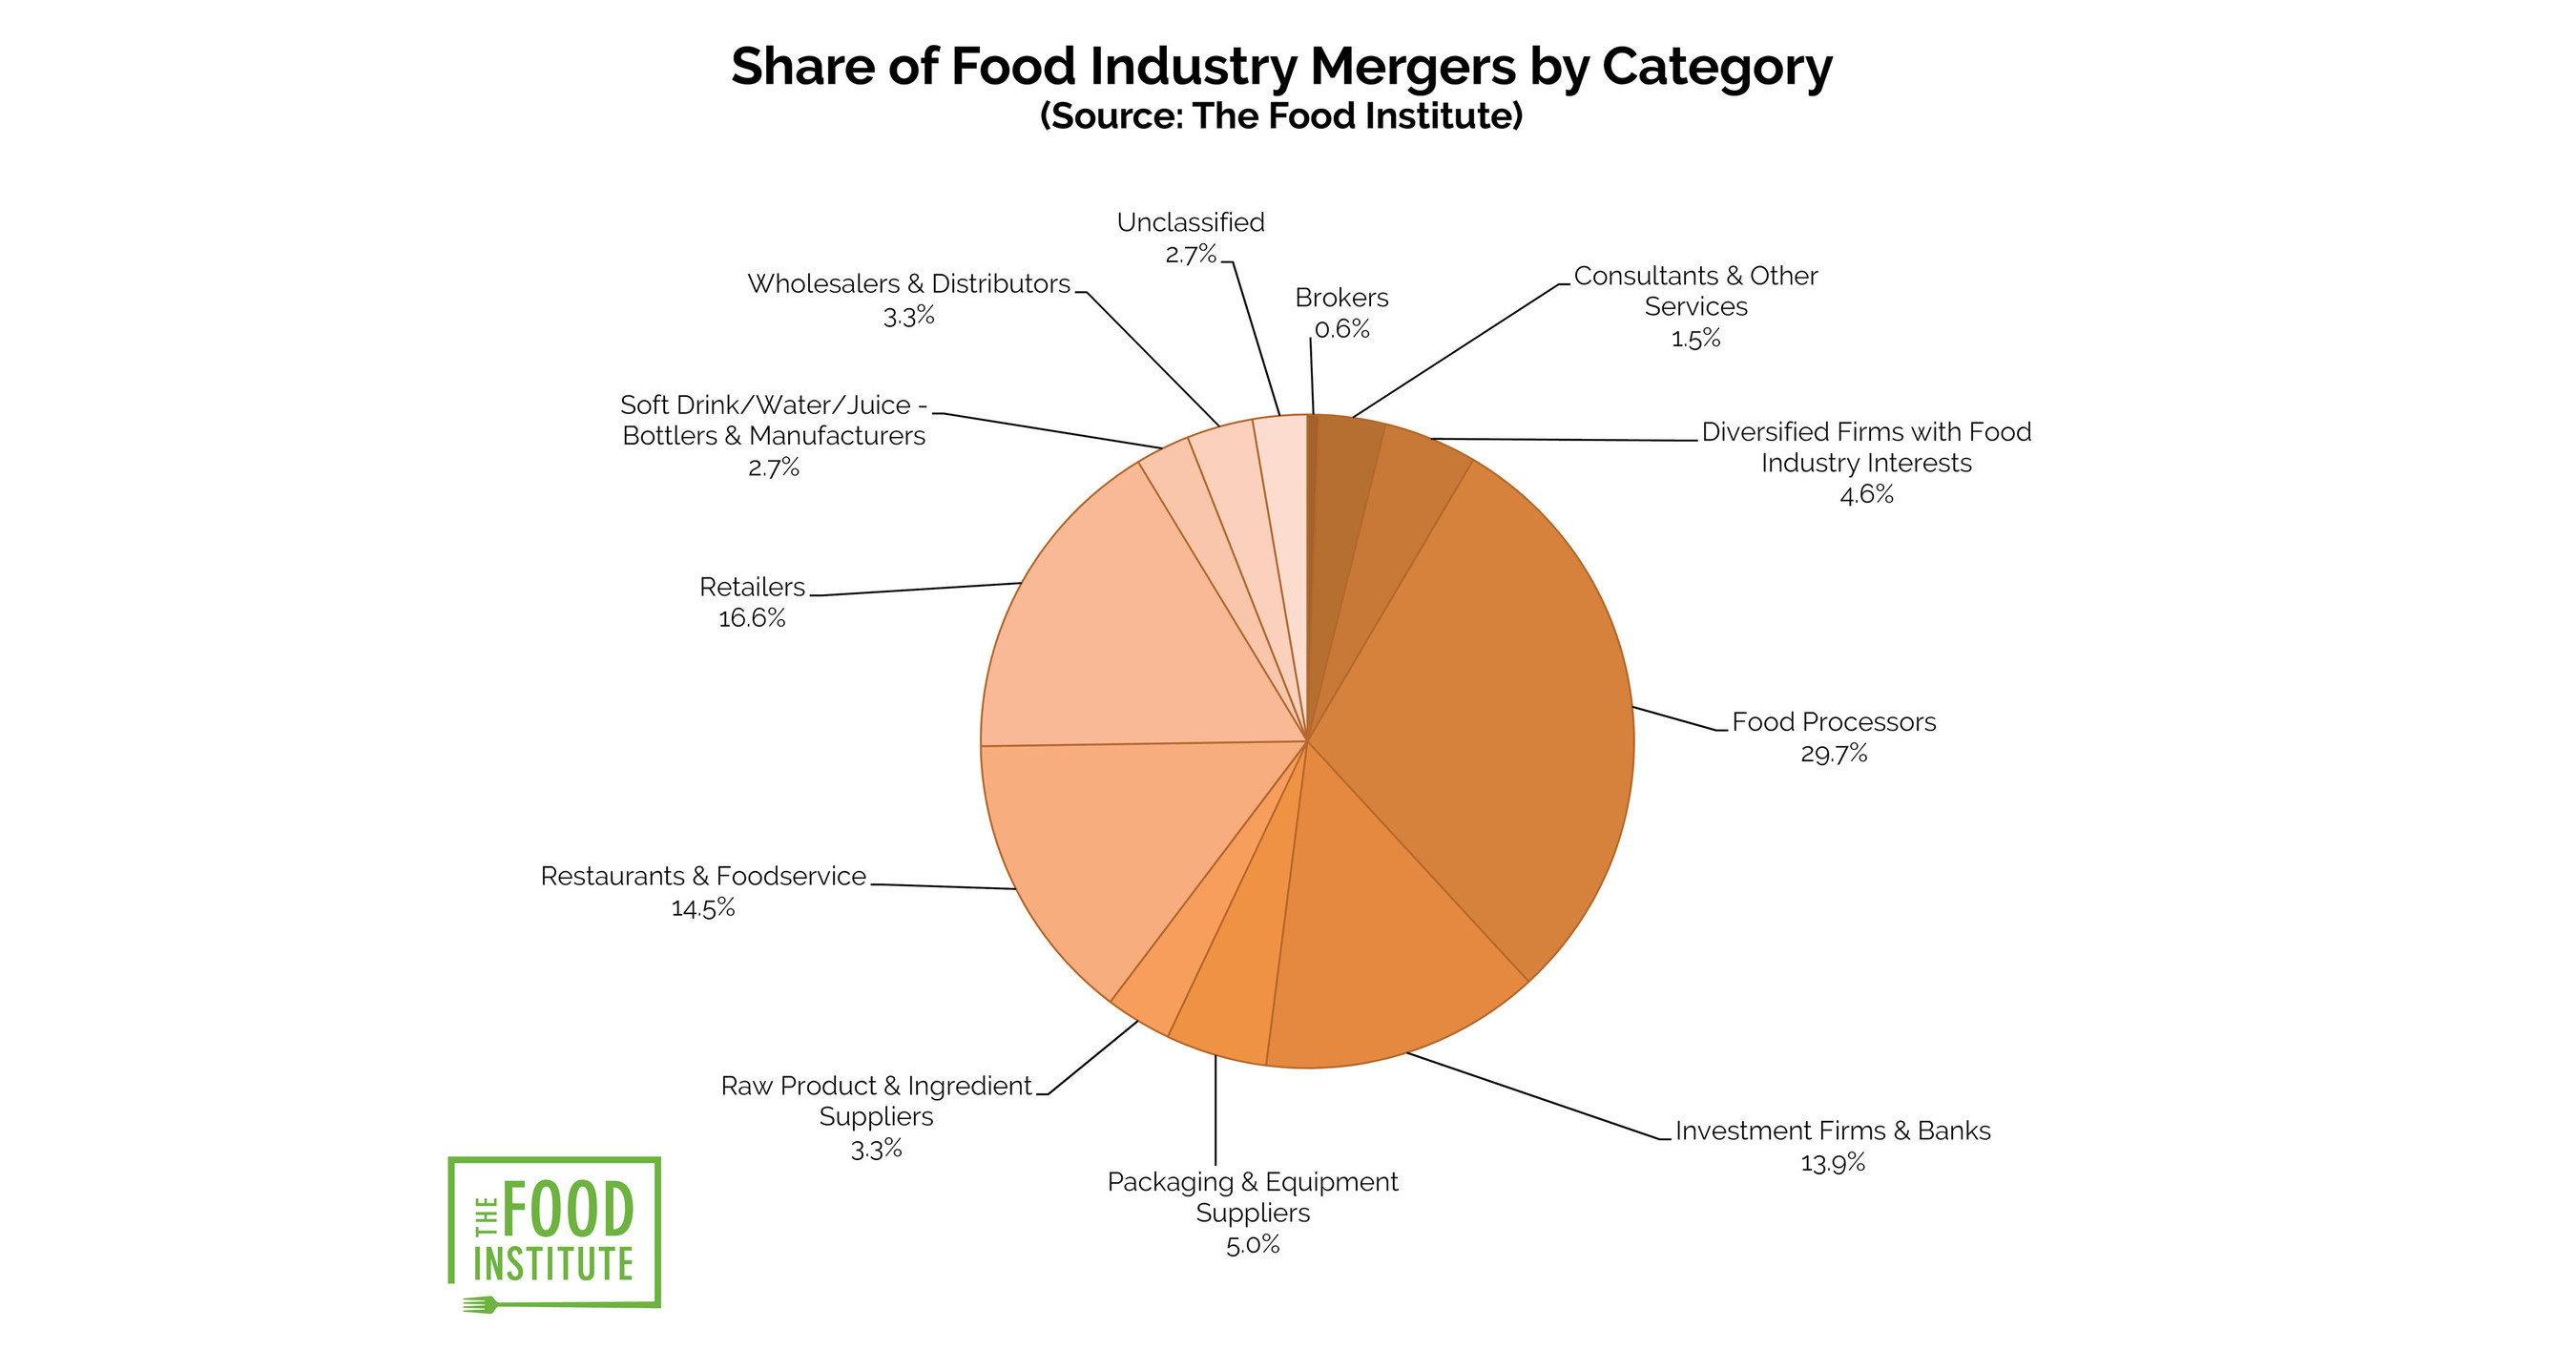 https://mma.prnewswire.com/media/845806/Food_Business_Mergers_and_Acquisitions_Infographic.jpg?p=facebook